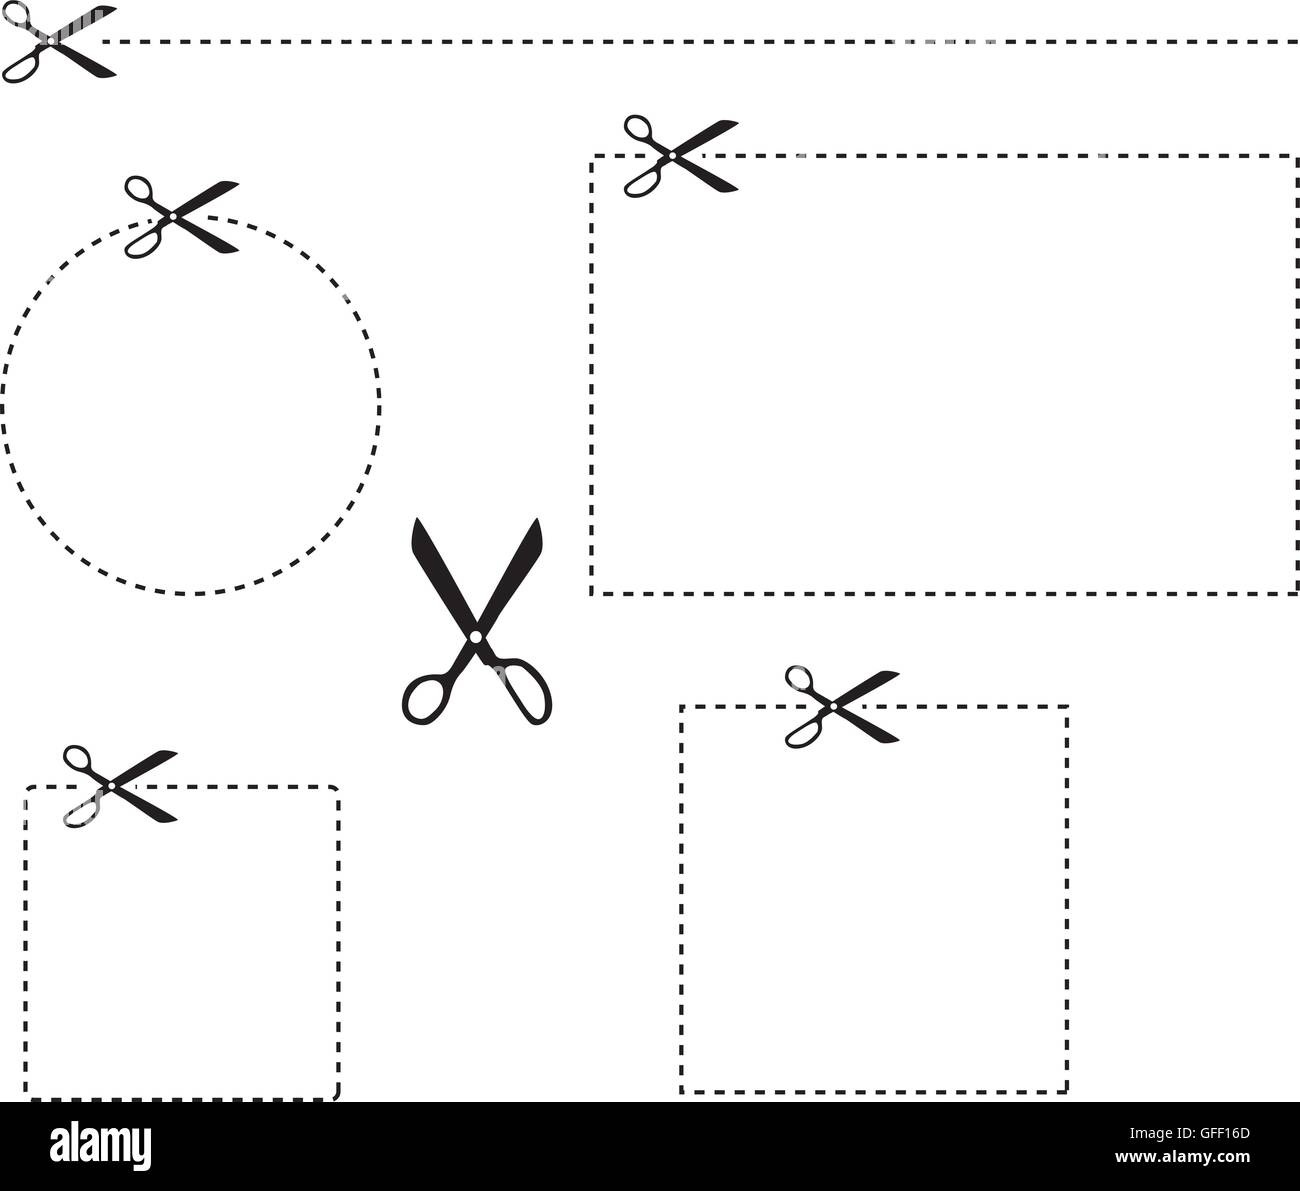 scissors scissor cut out dashed line dotted lines cut vector Stock Vector